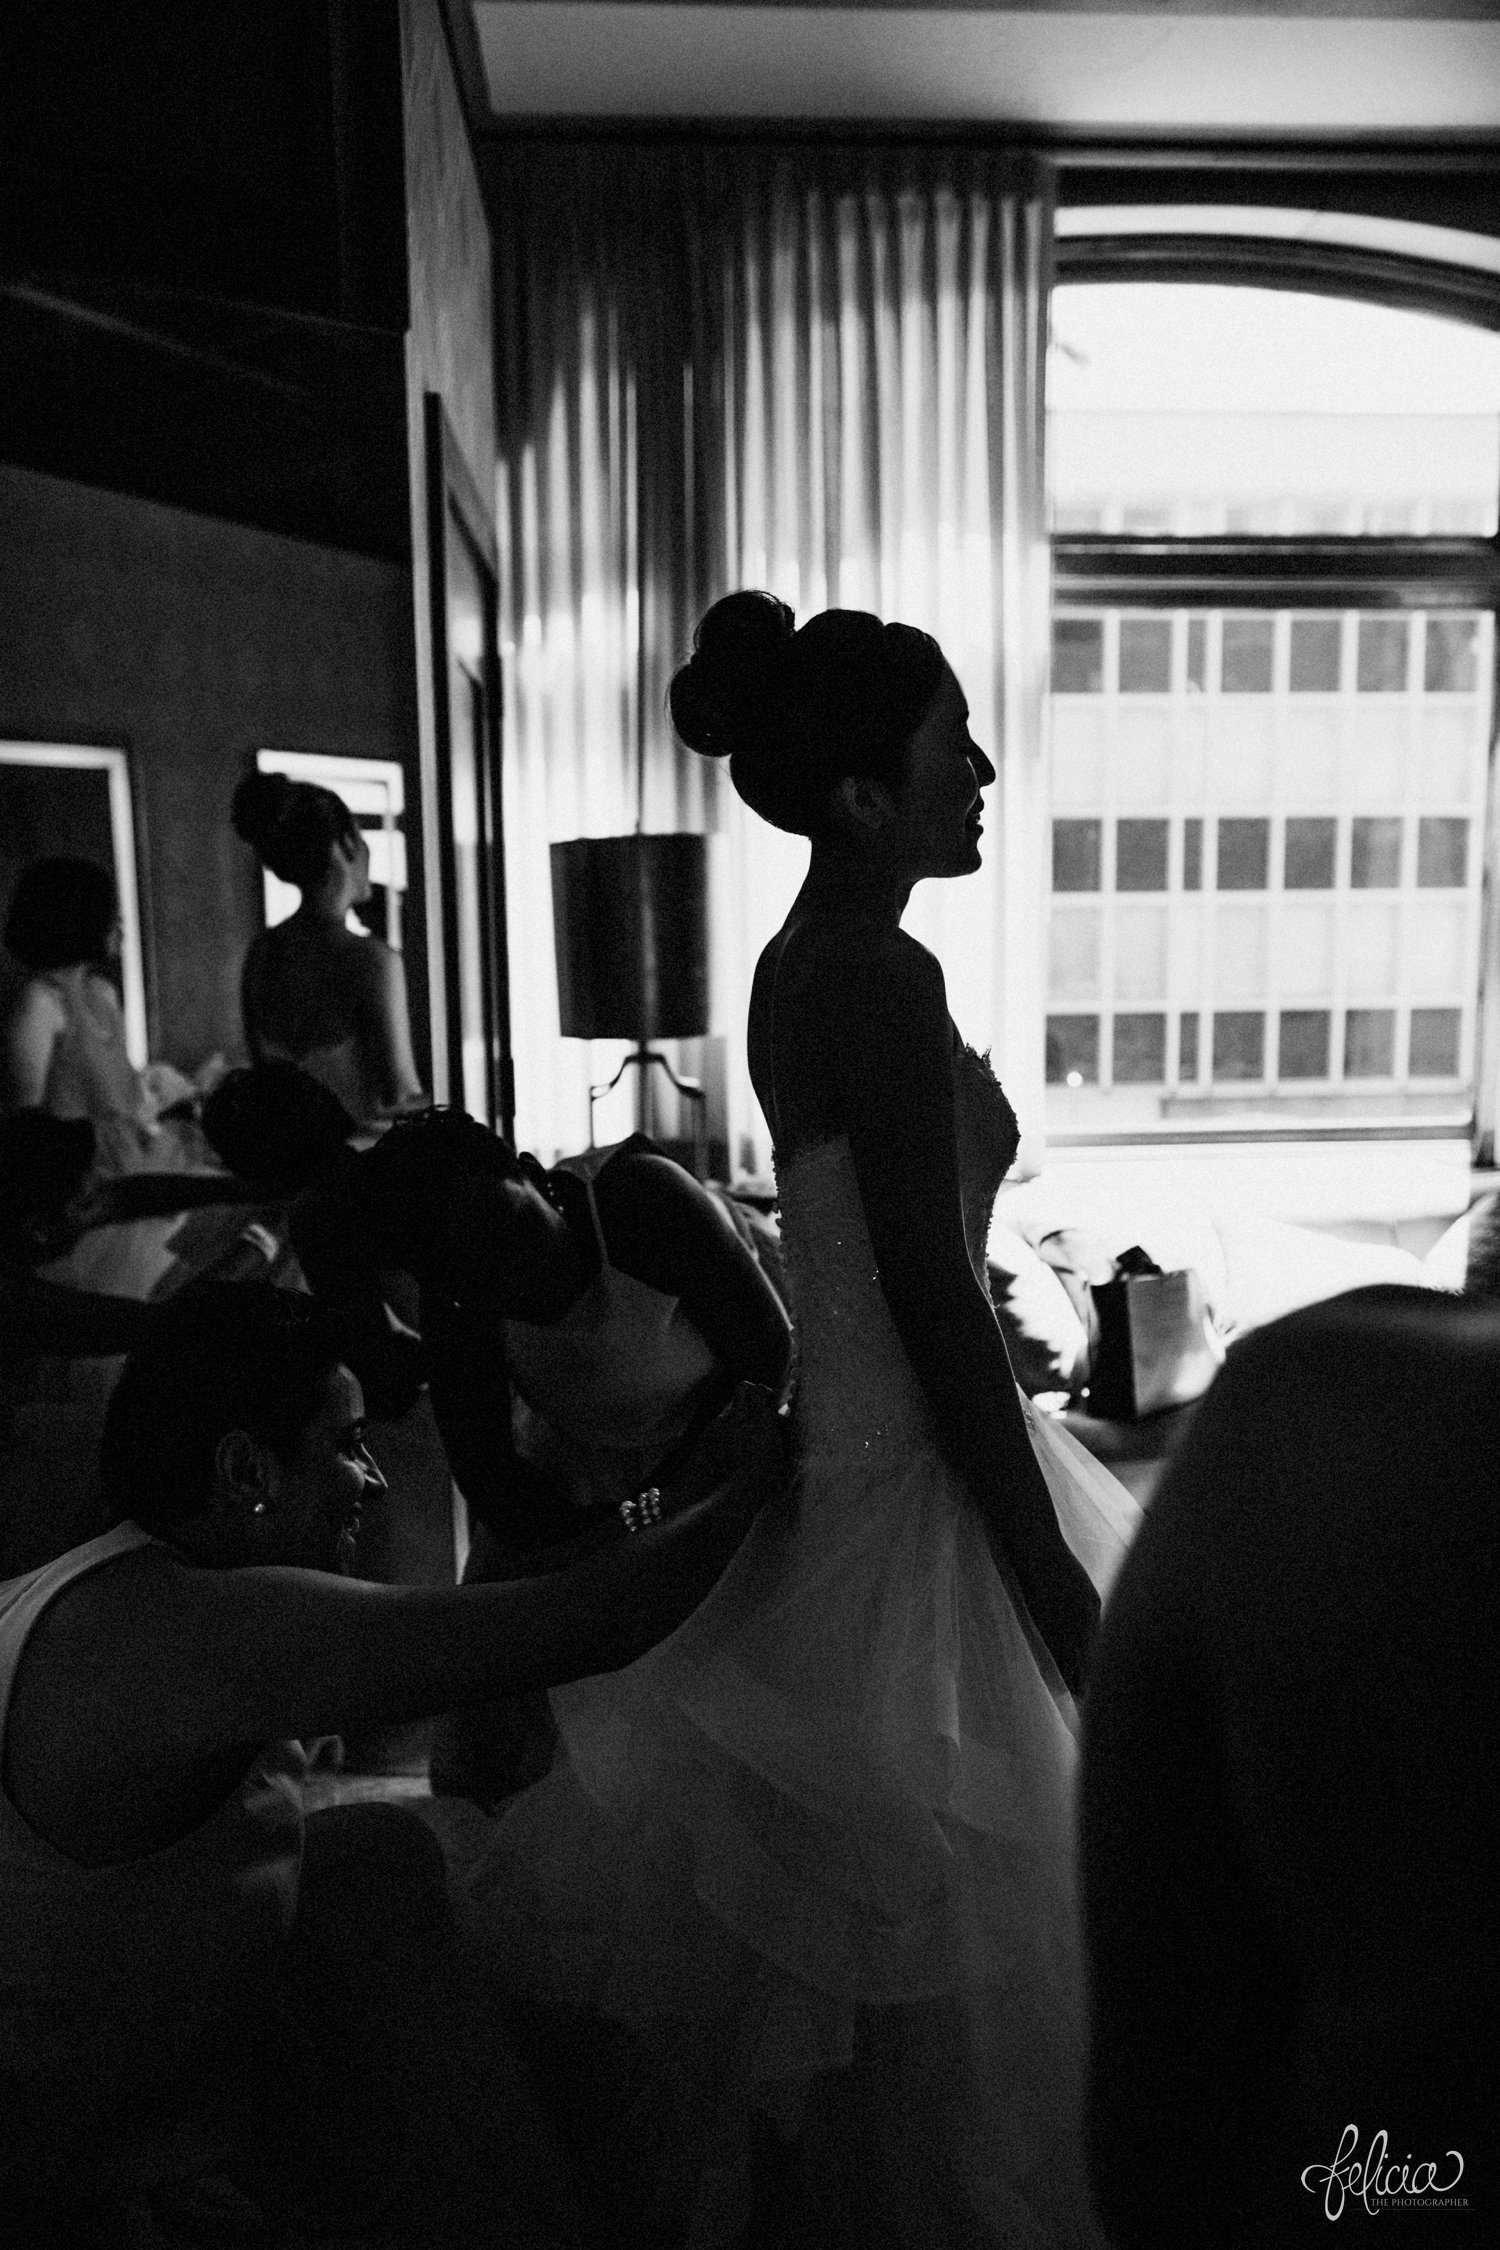 images by feliciathephotographer.com | destination wedding photographer | the grand hall at power and light | kansas city | missouri | downtown | glamorous | multicultural | getting ready | putting on the dress | details | black and white | posh bridal | high bun | strapless | dramatic lighting | 